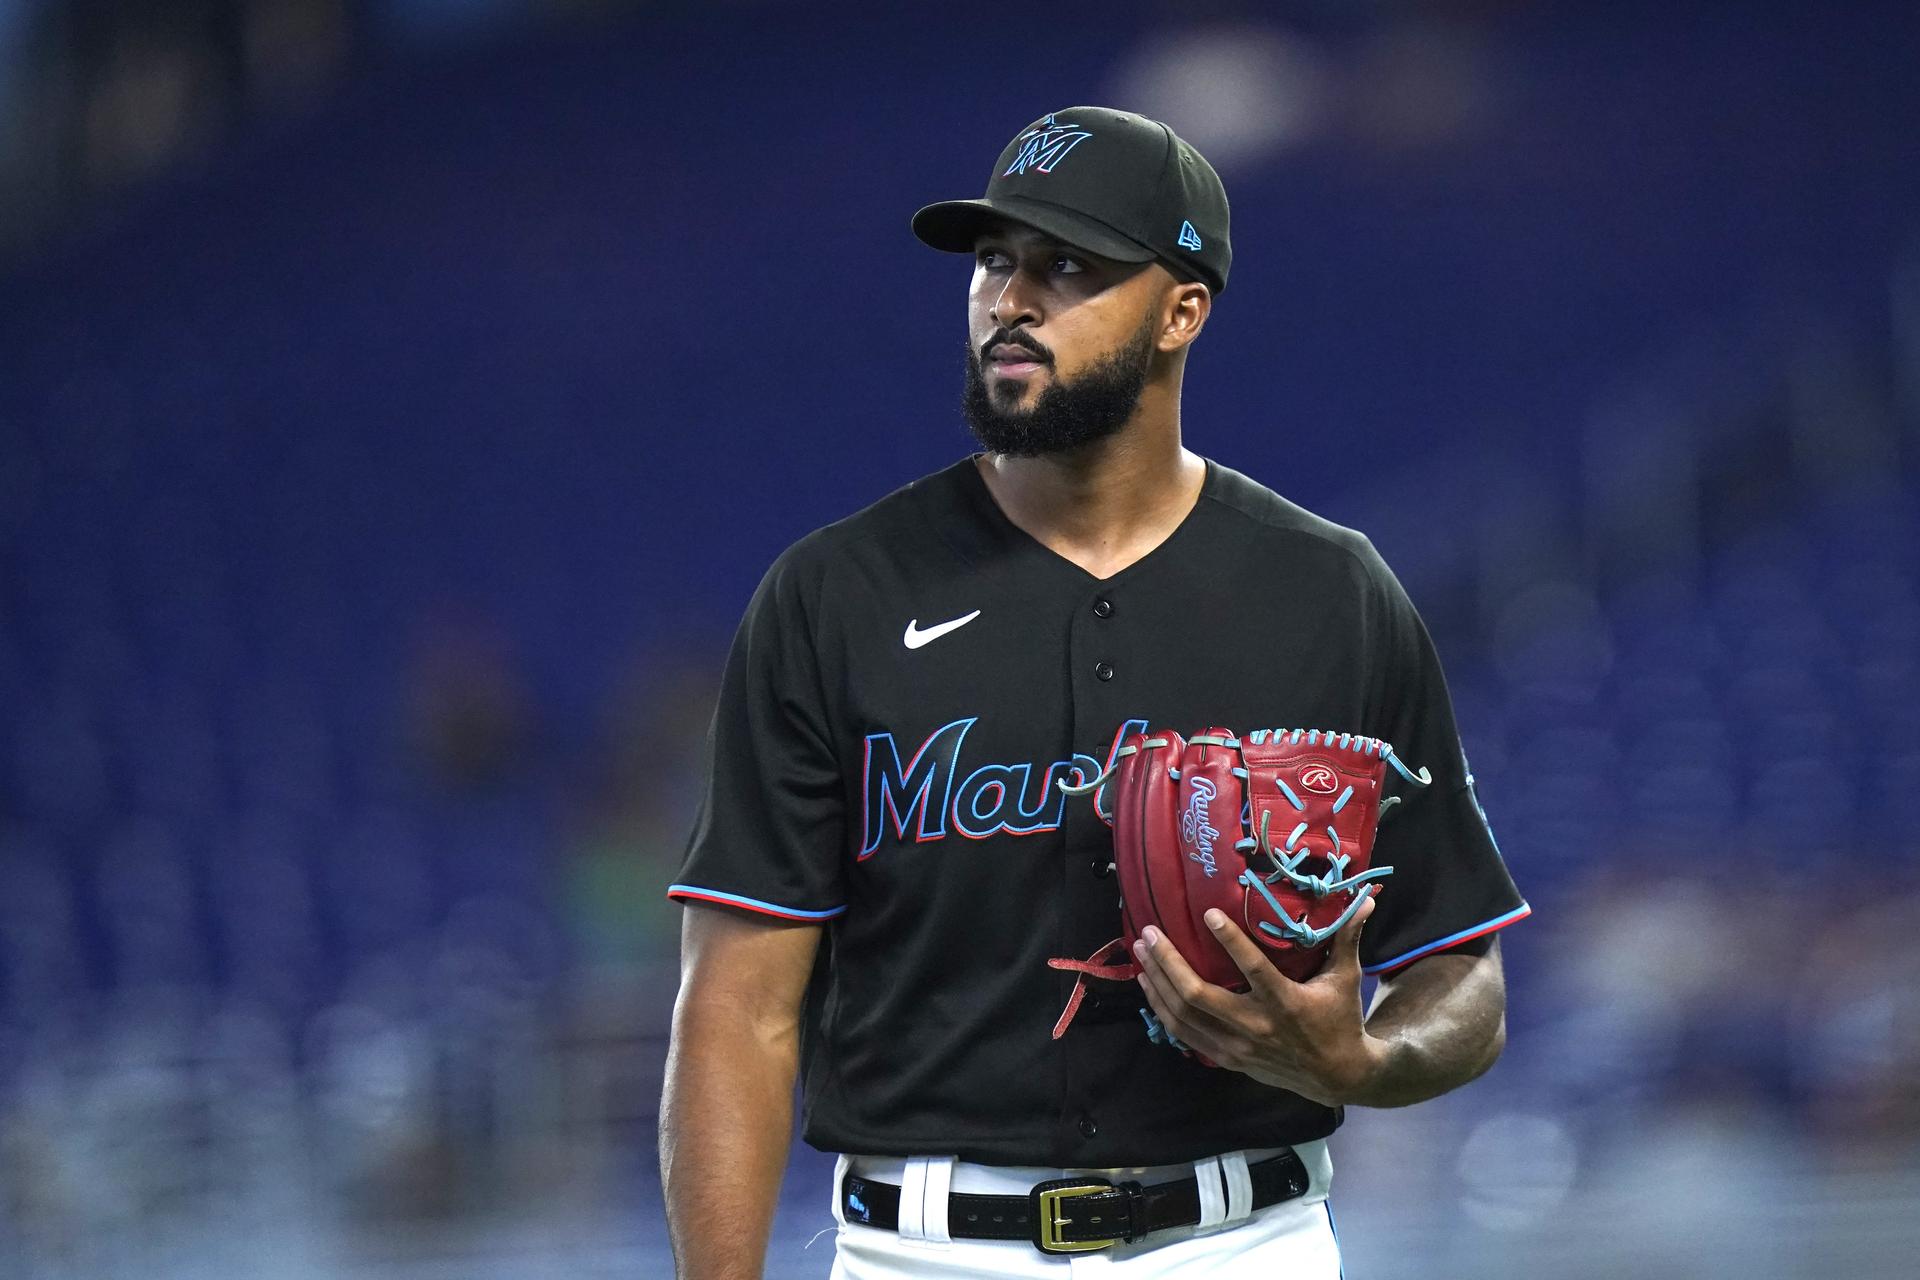 Mets vs. Marlins Player Prop Bets Today - July 29, 2022: Sandy Strikes Again